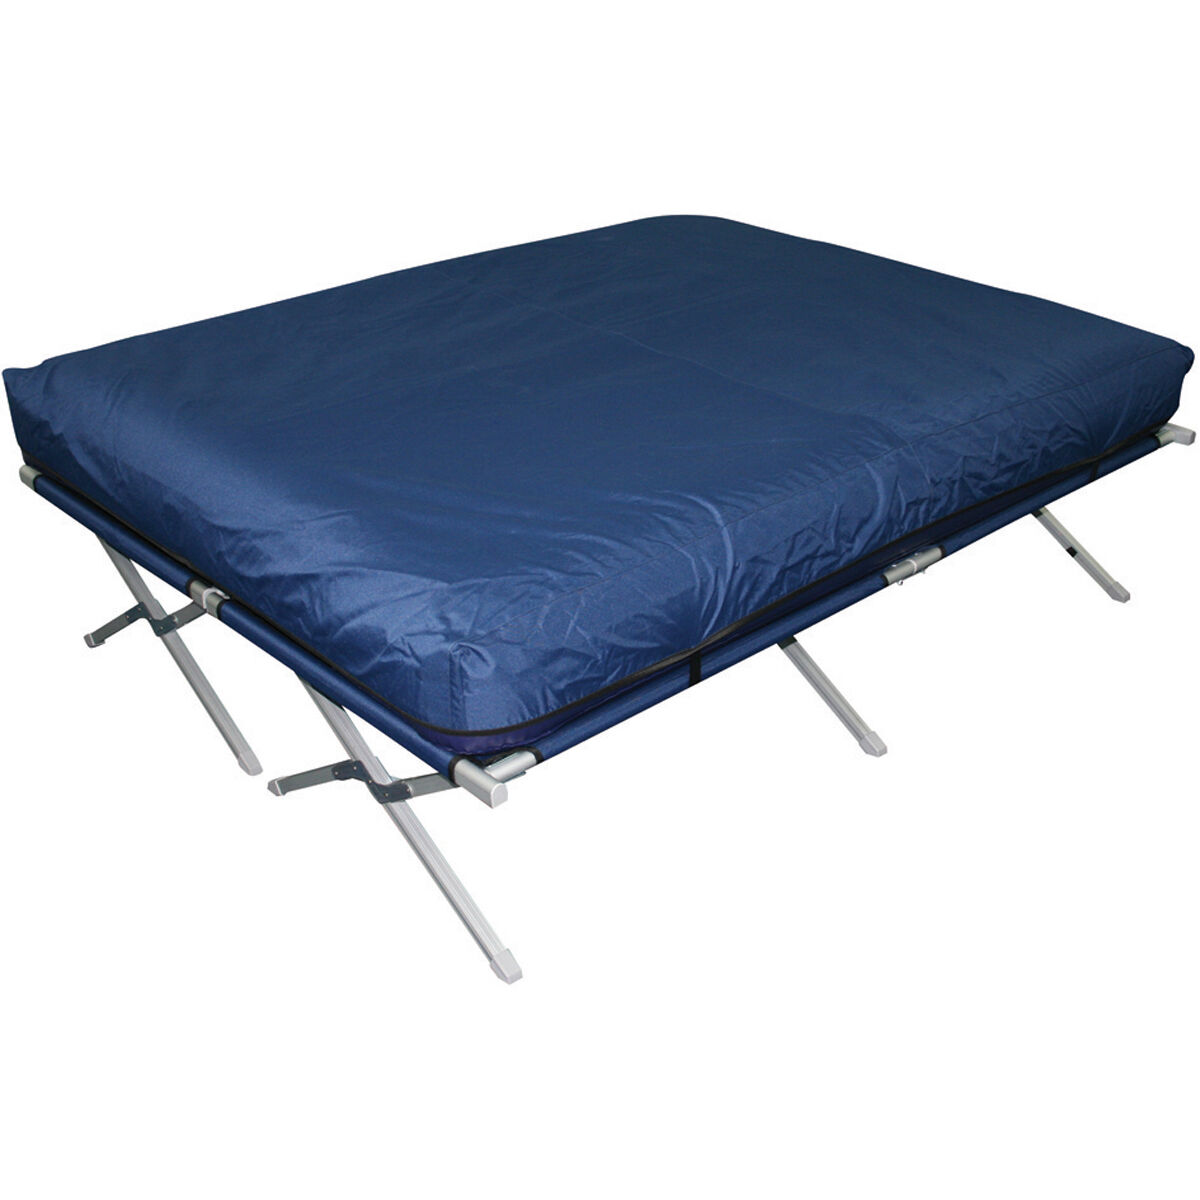 double bed stretcher